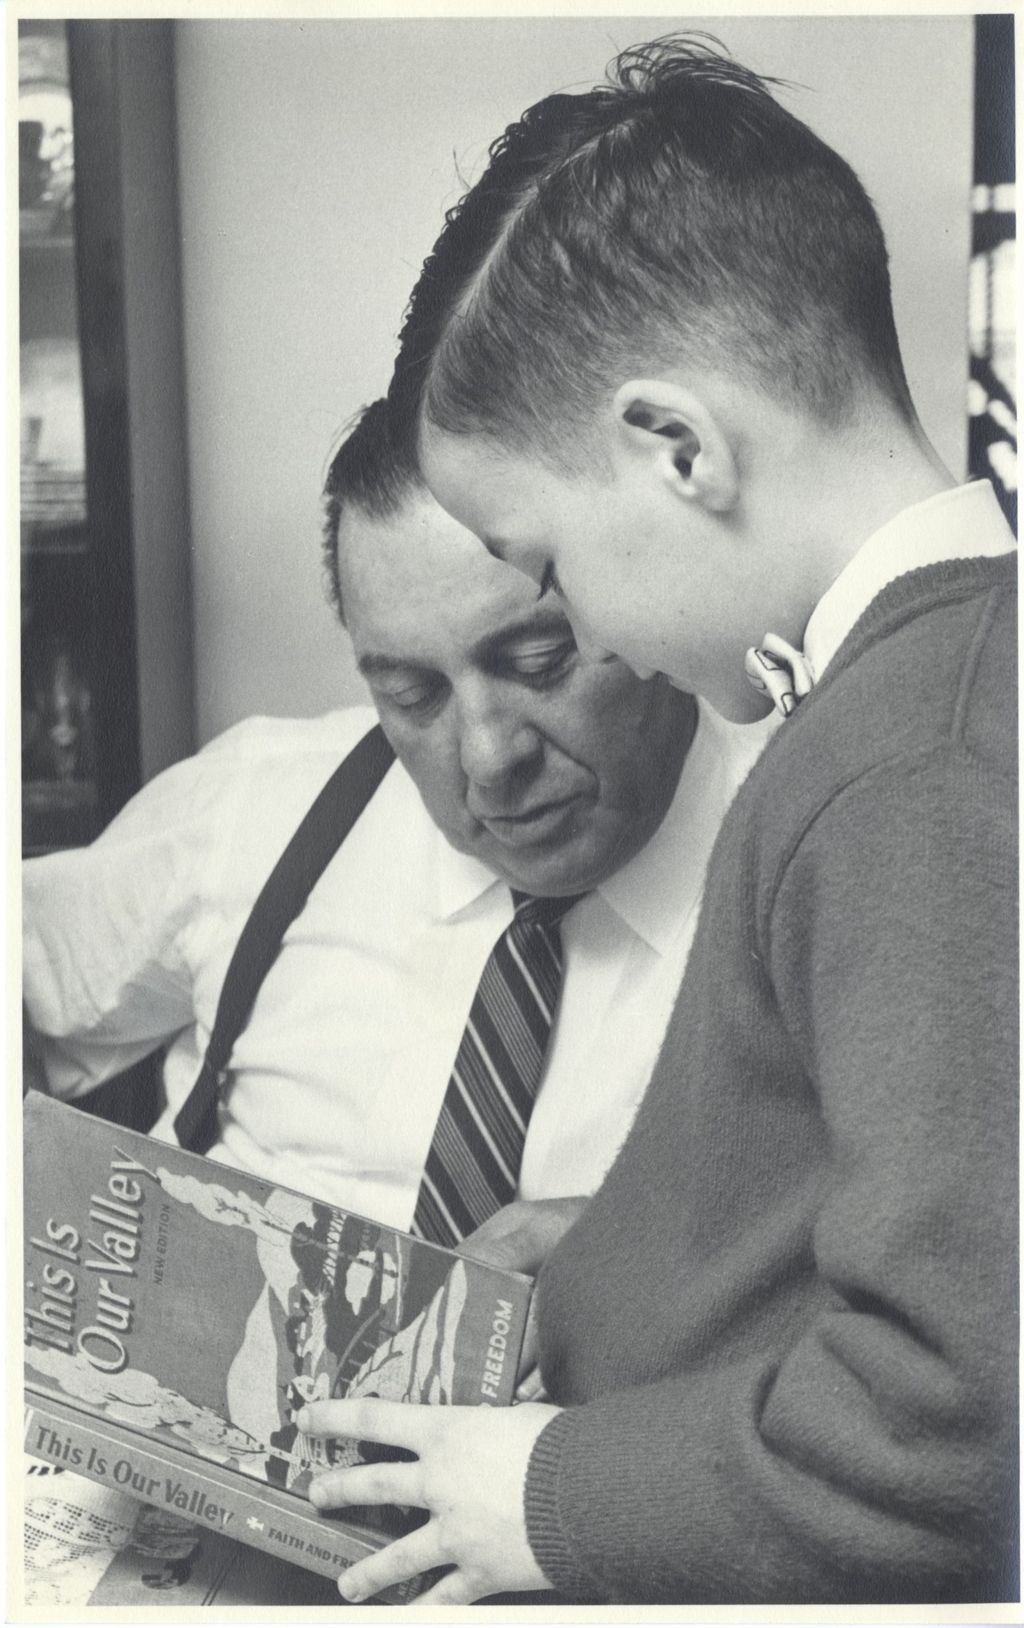 Miniature of Richard J. Daley and his son with a school book